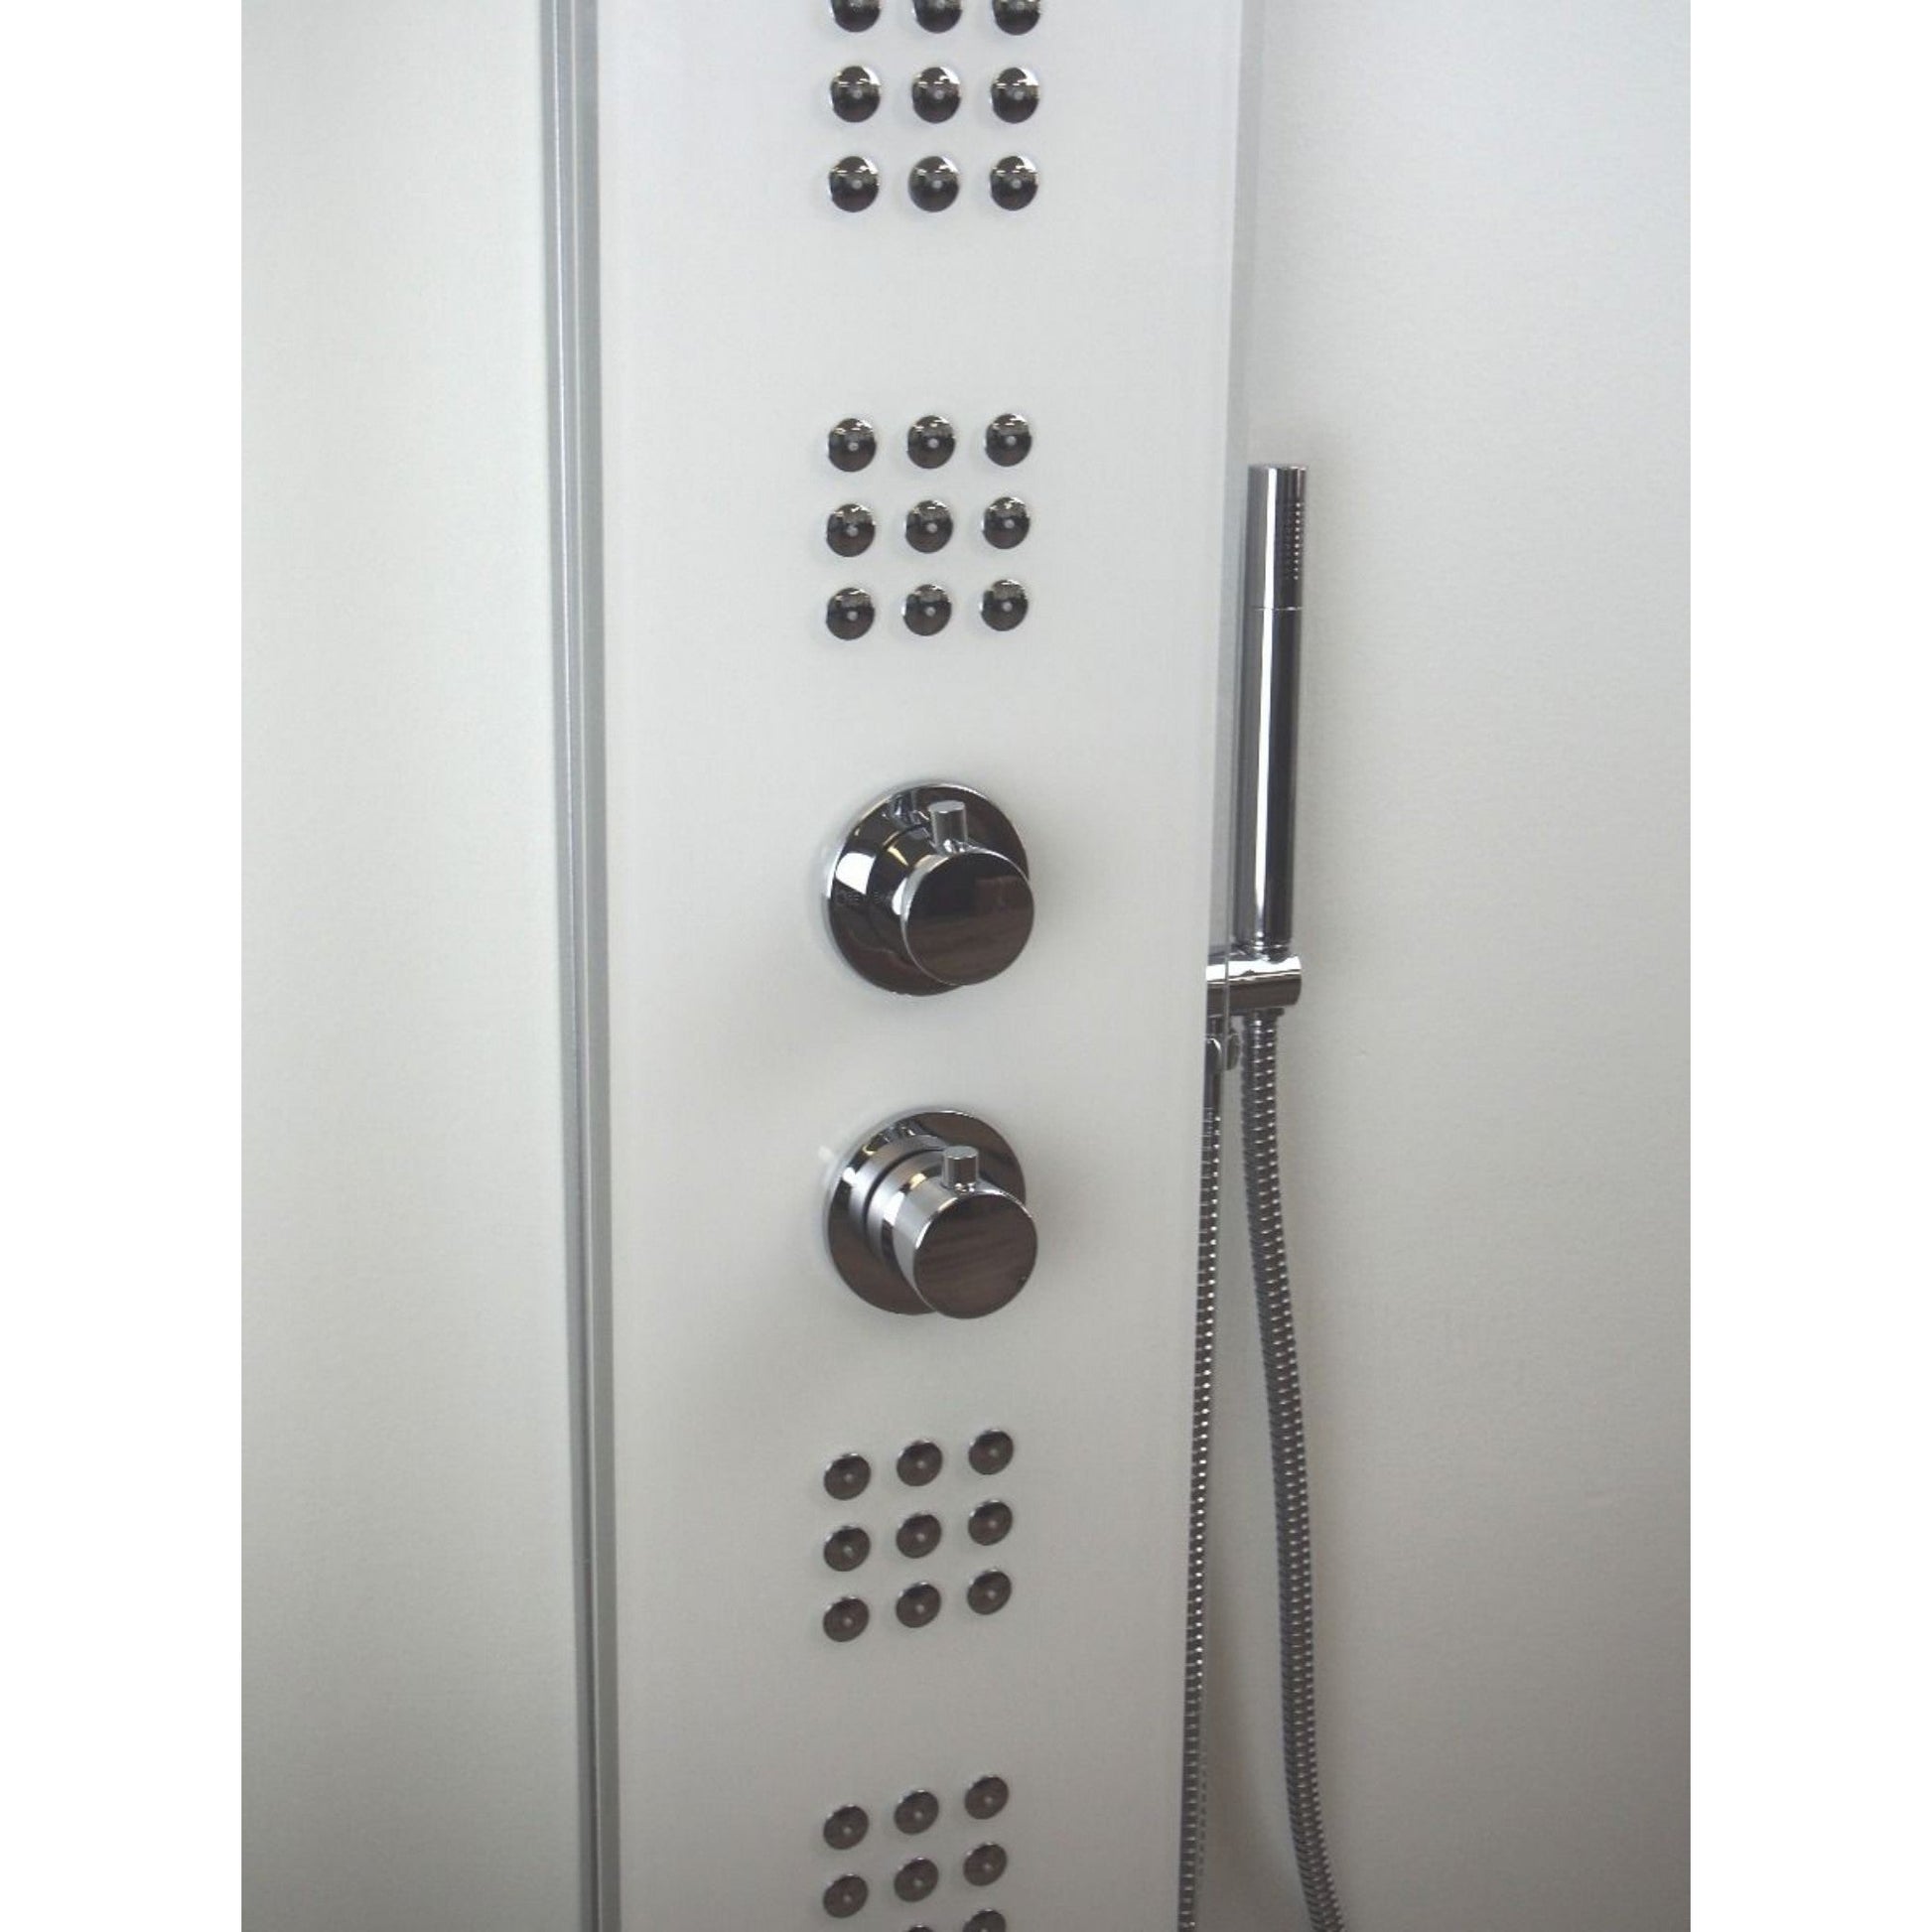 Ratel 63" White Tempered Glass Shower Panel With Round Head Shower and 2-Set Massage Jets